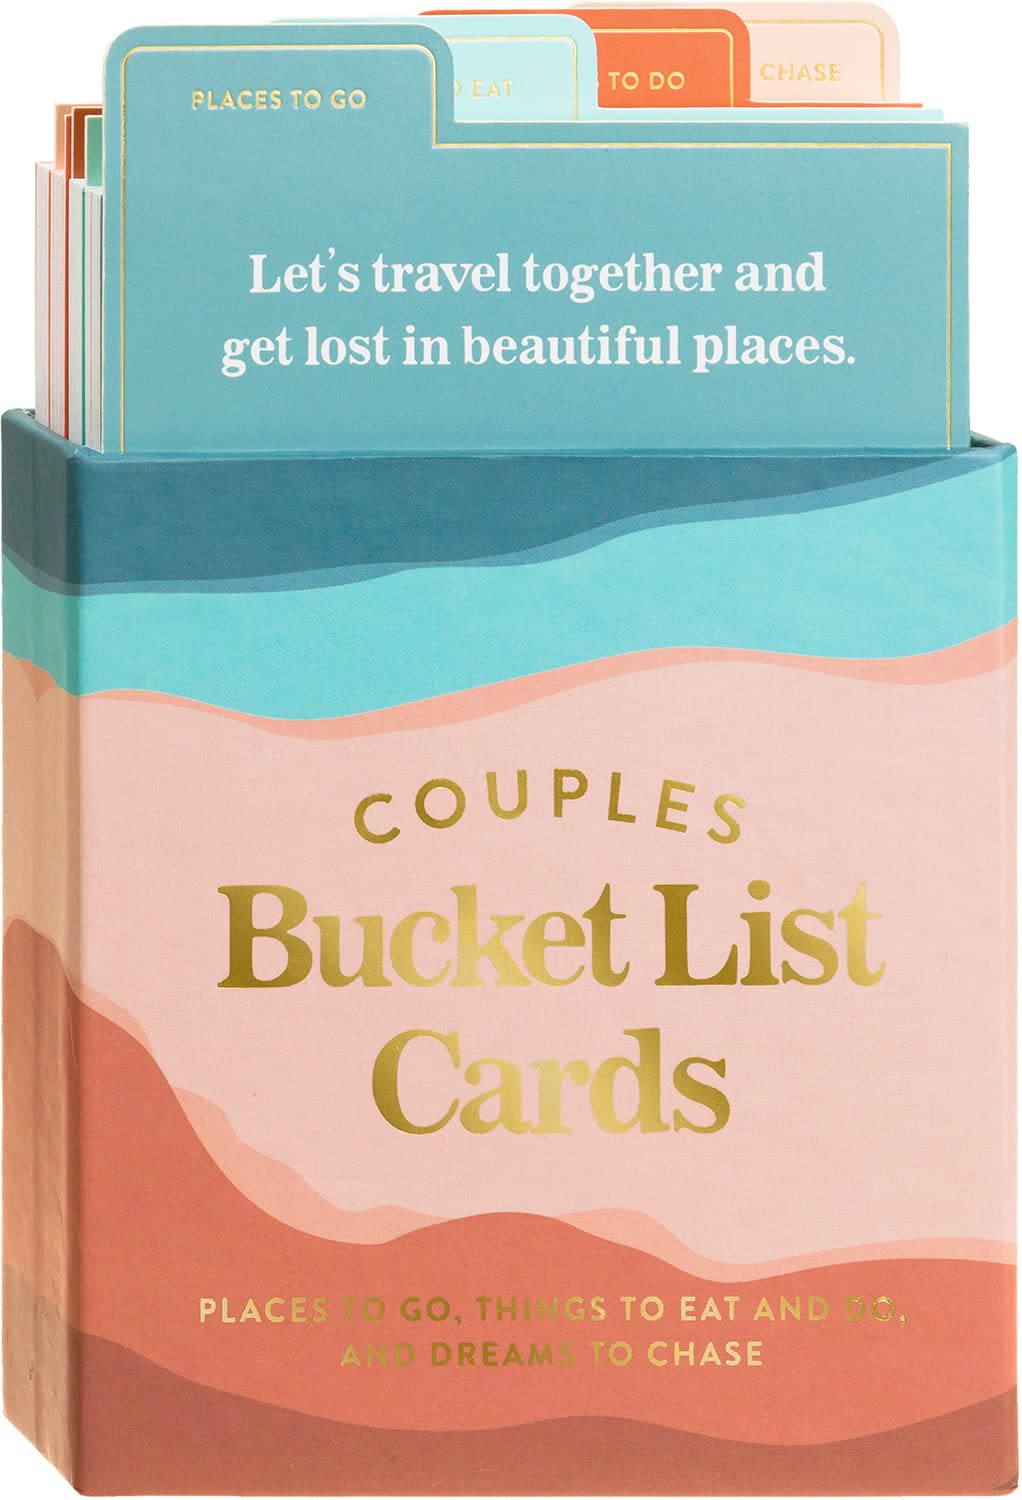 Eccolo Couples Bucket List Cards Box Set - Date Ideas and Adventures for Couples